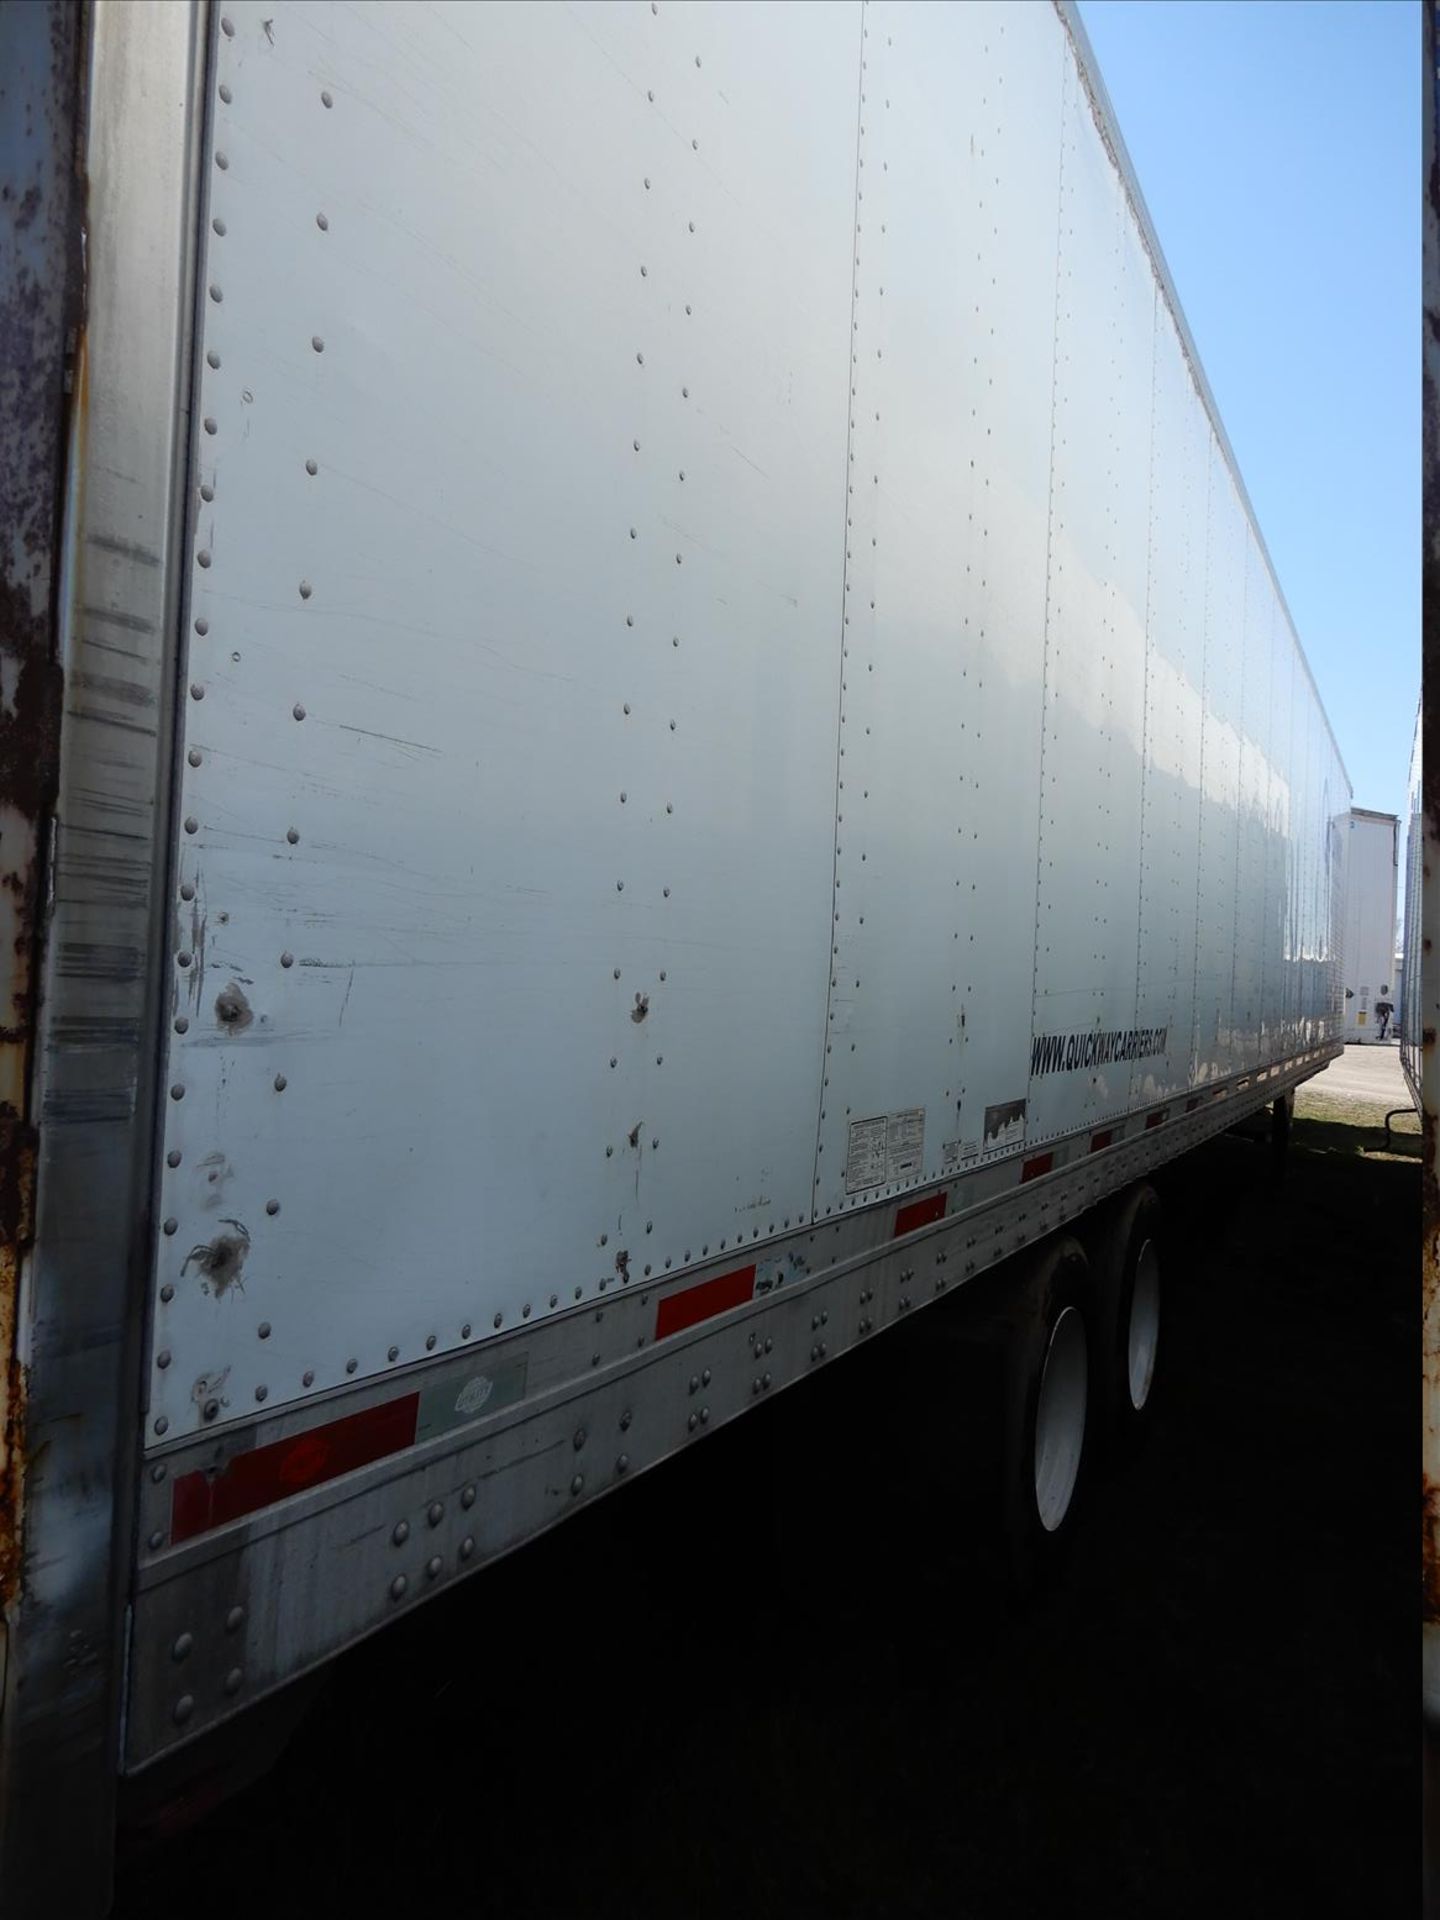 2008 Utility Trailer - Located in Indianapolis, IN - Image 20 of 35